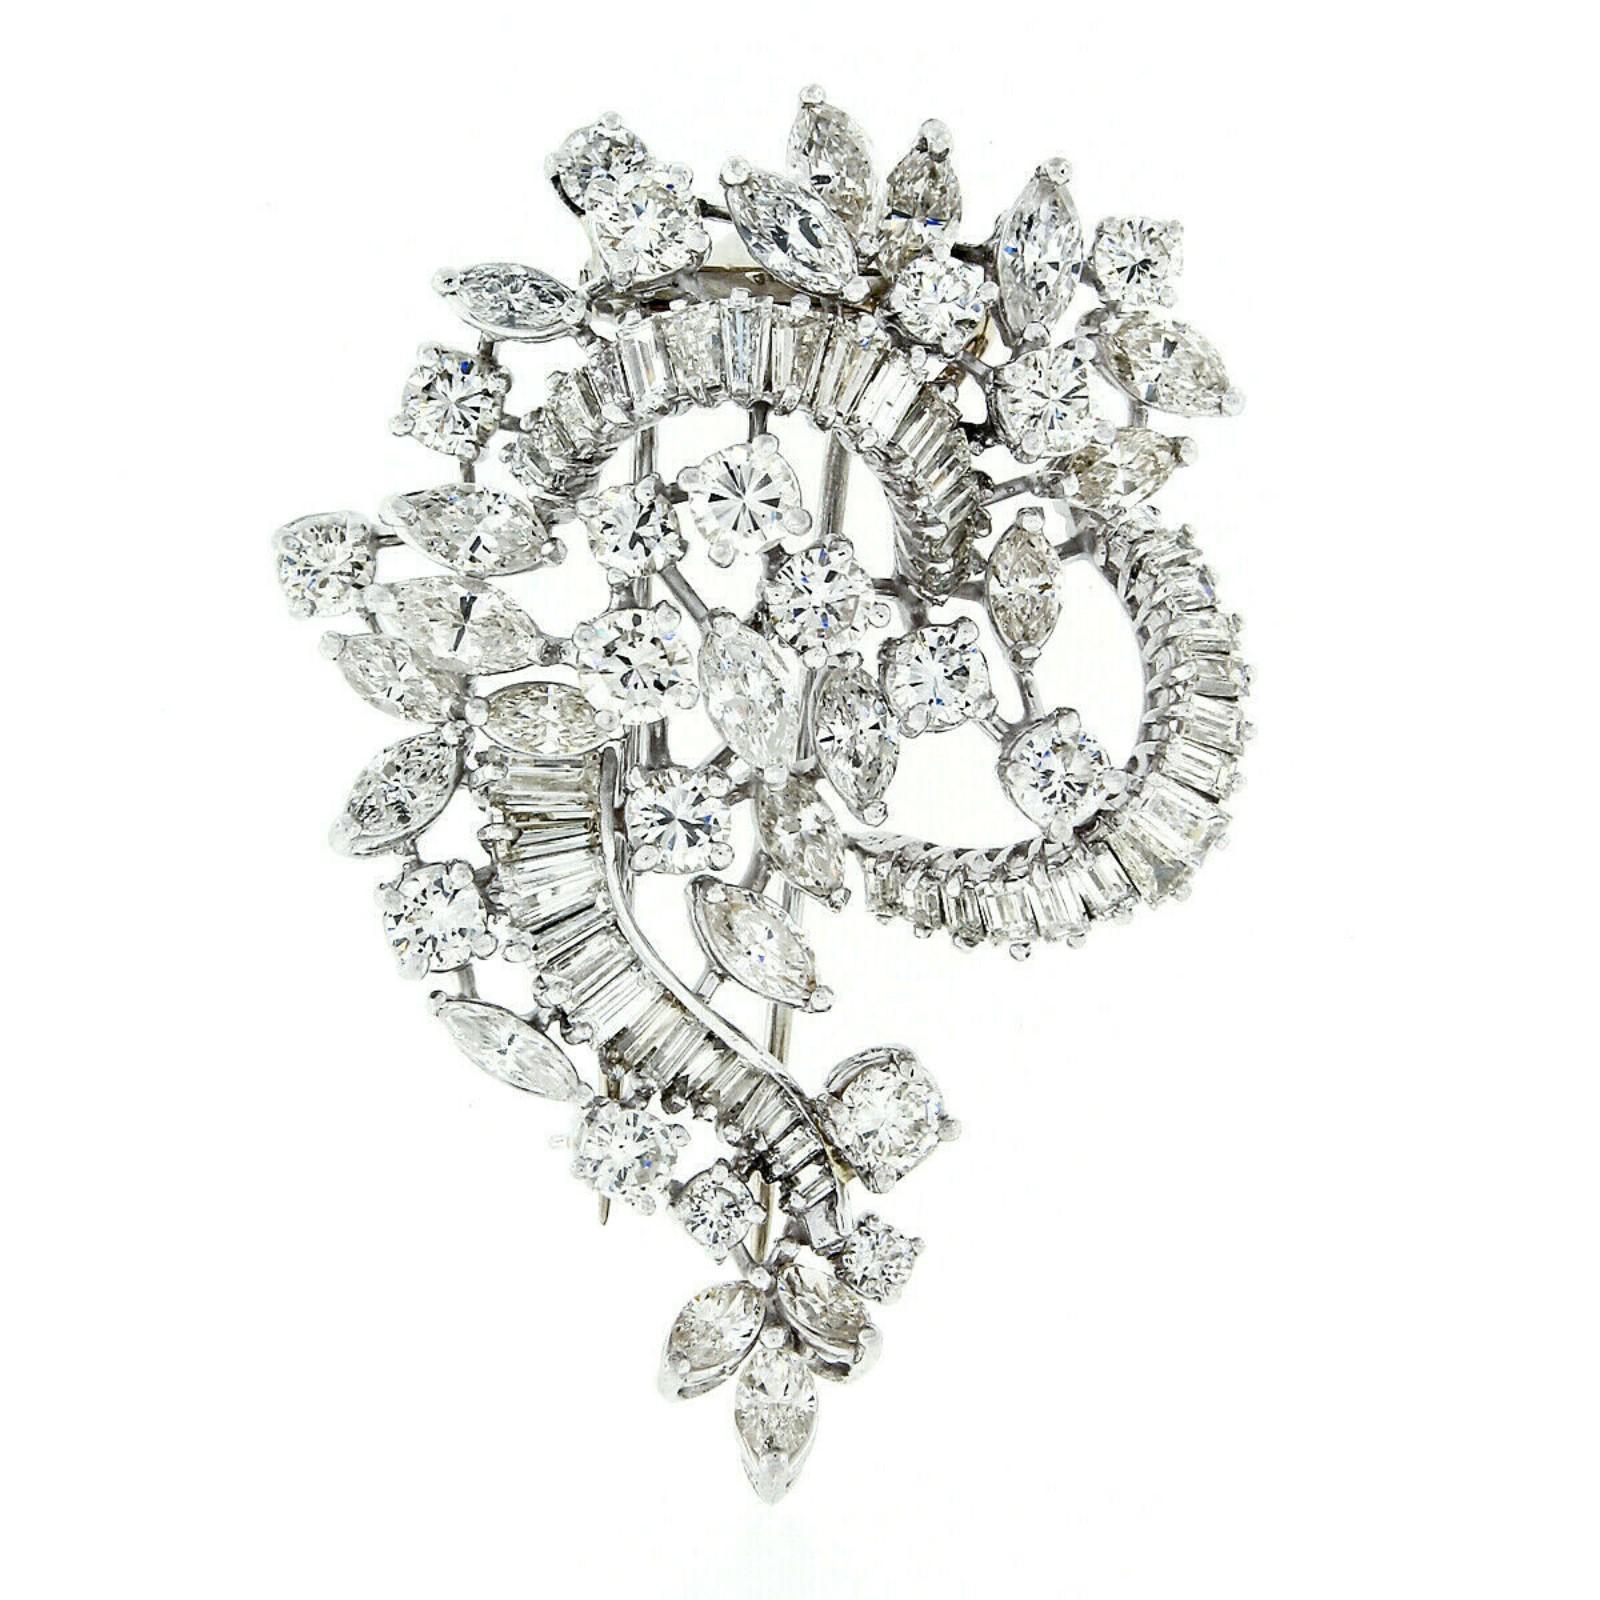 This magnificent and unique diamond brooch was hand crafted from solid platinum and is drenched with approximately 8.85 carats of fine quality and remarkably brilliant diamonds throughout. The brooch has a free-form spray or floral-like design